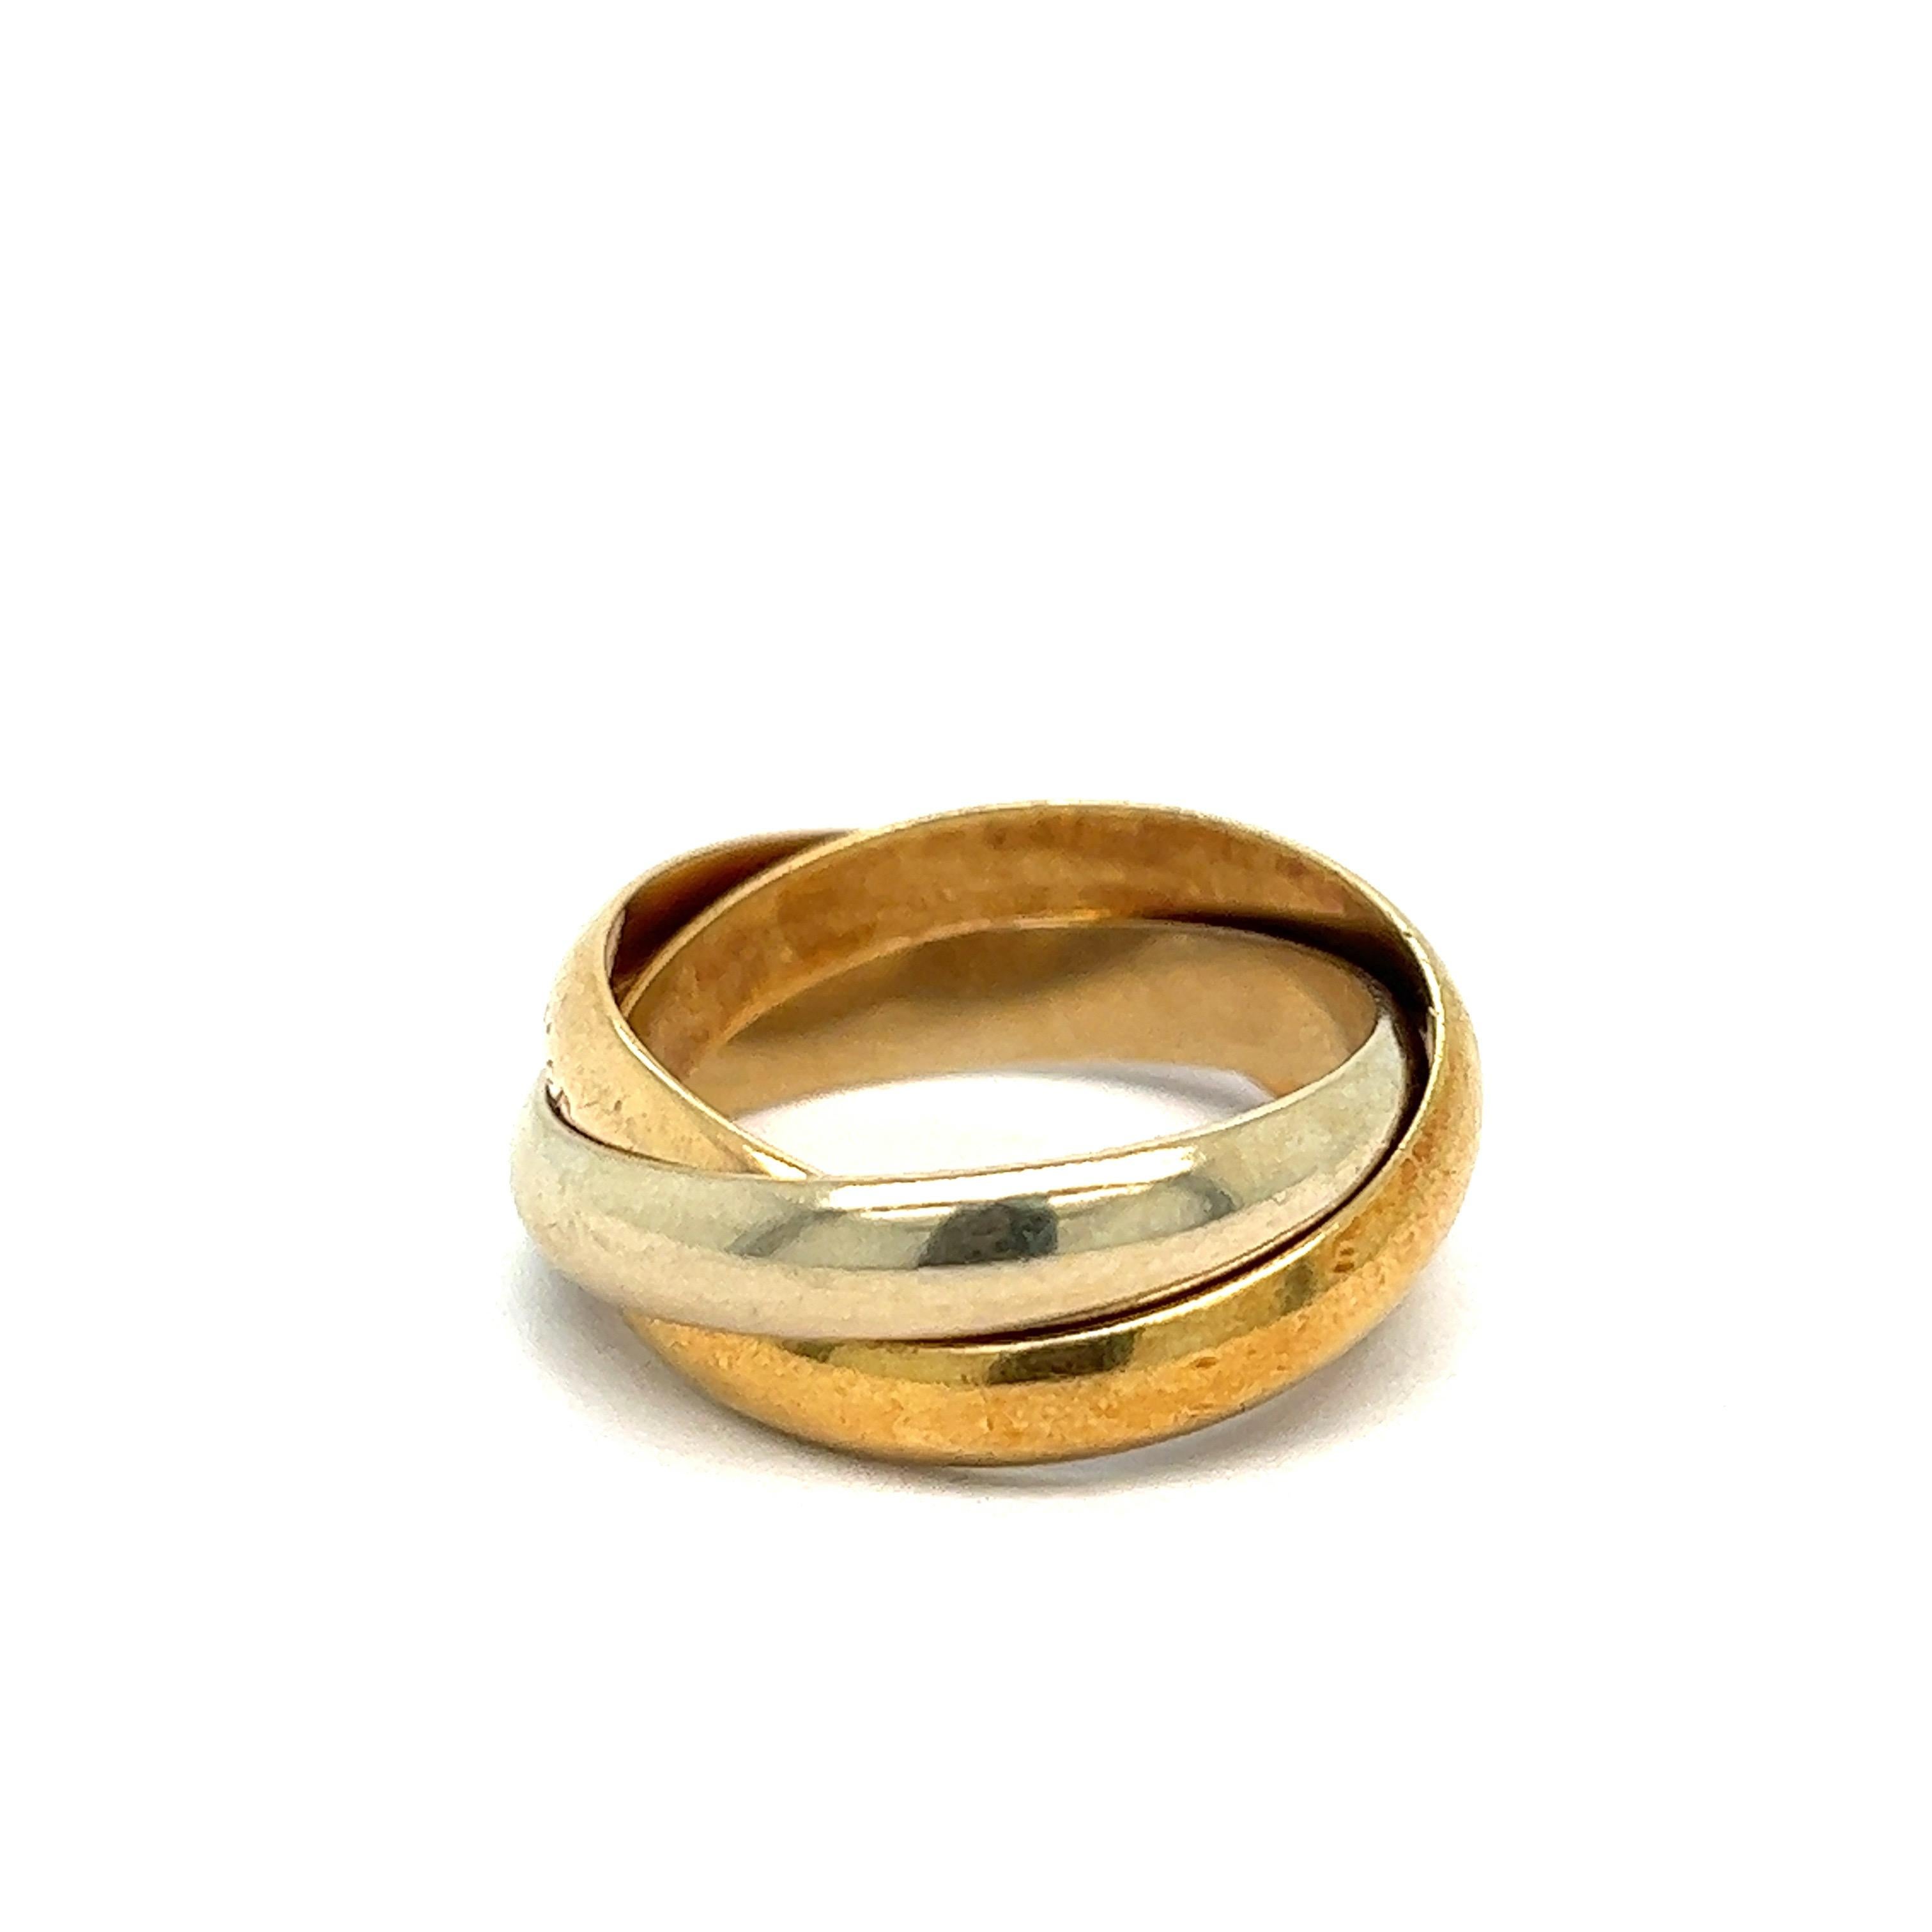 Cartier Les Must de Cartier Gold Rings In Good Condition For Sale In New York, NY